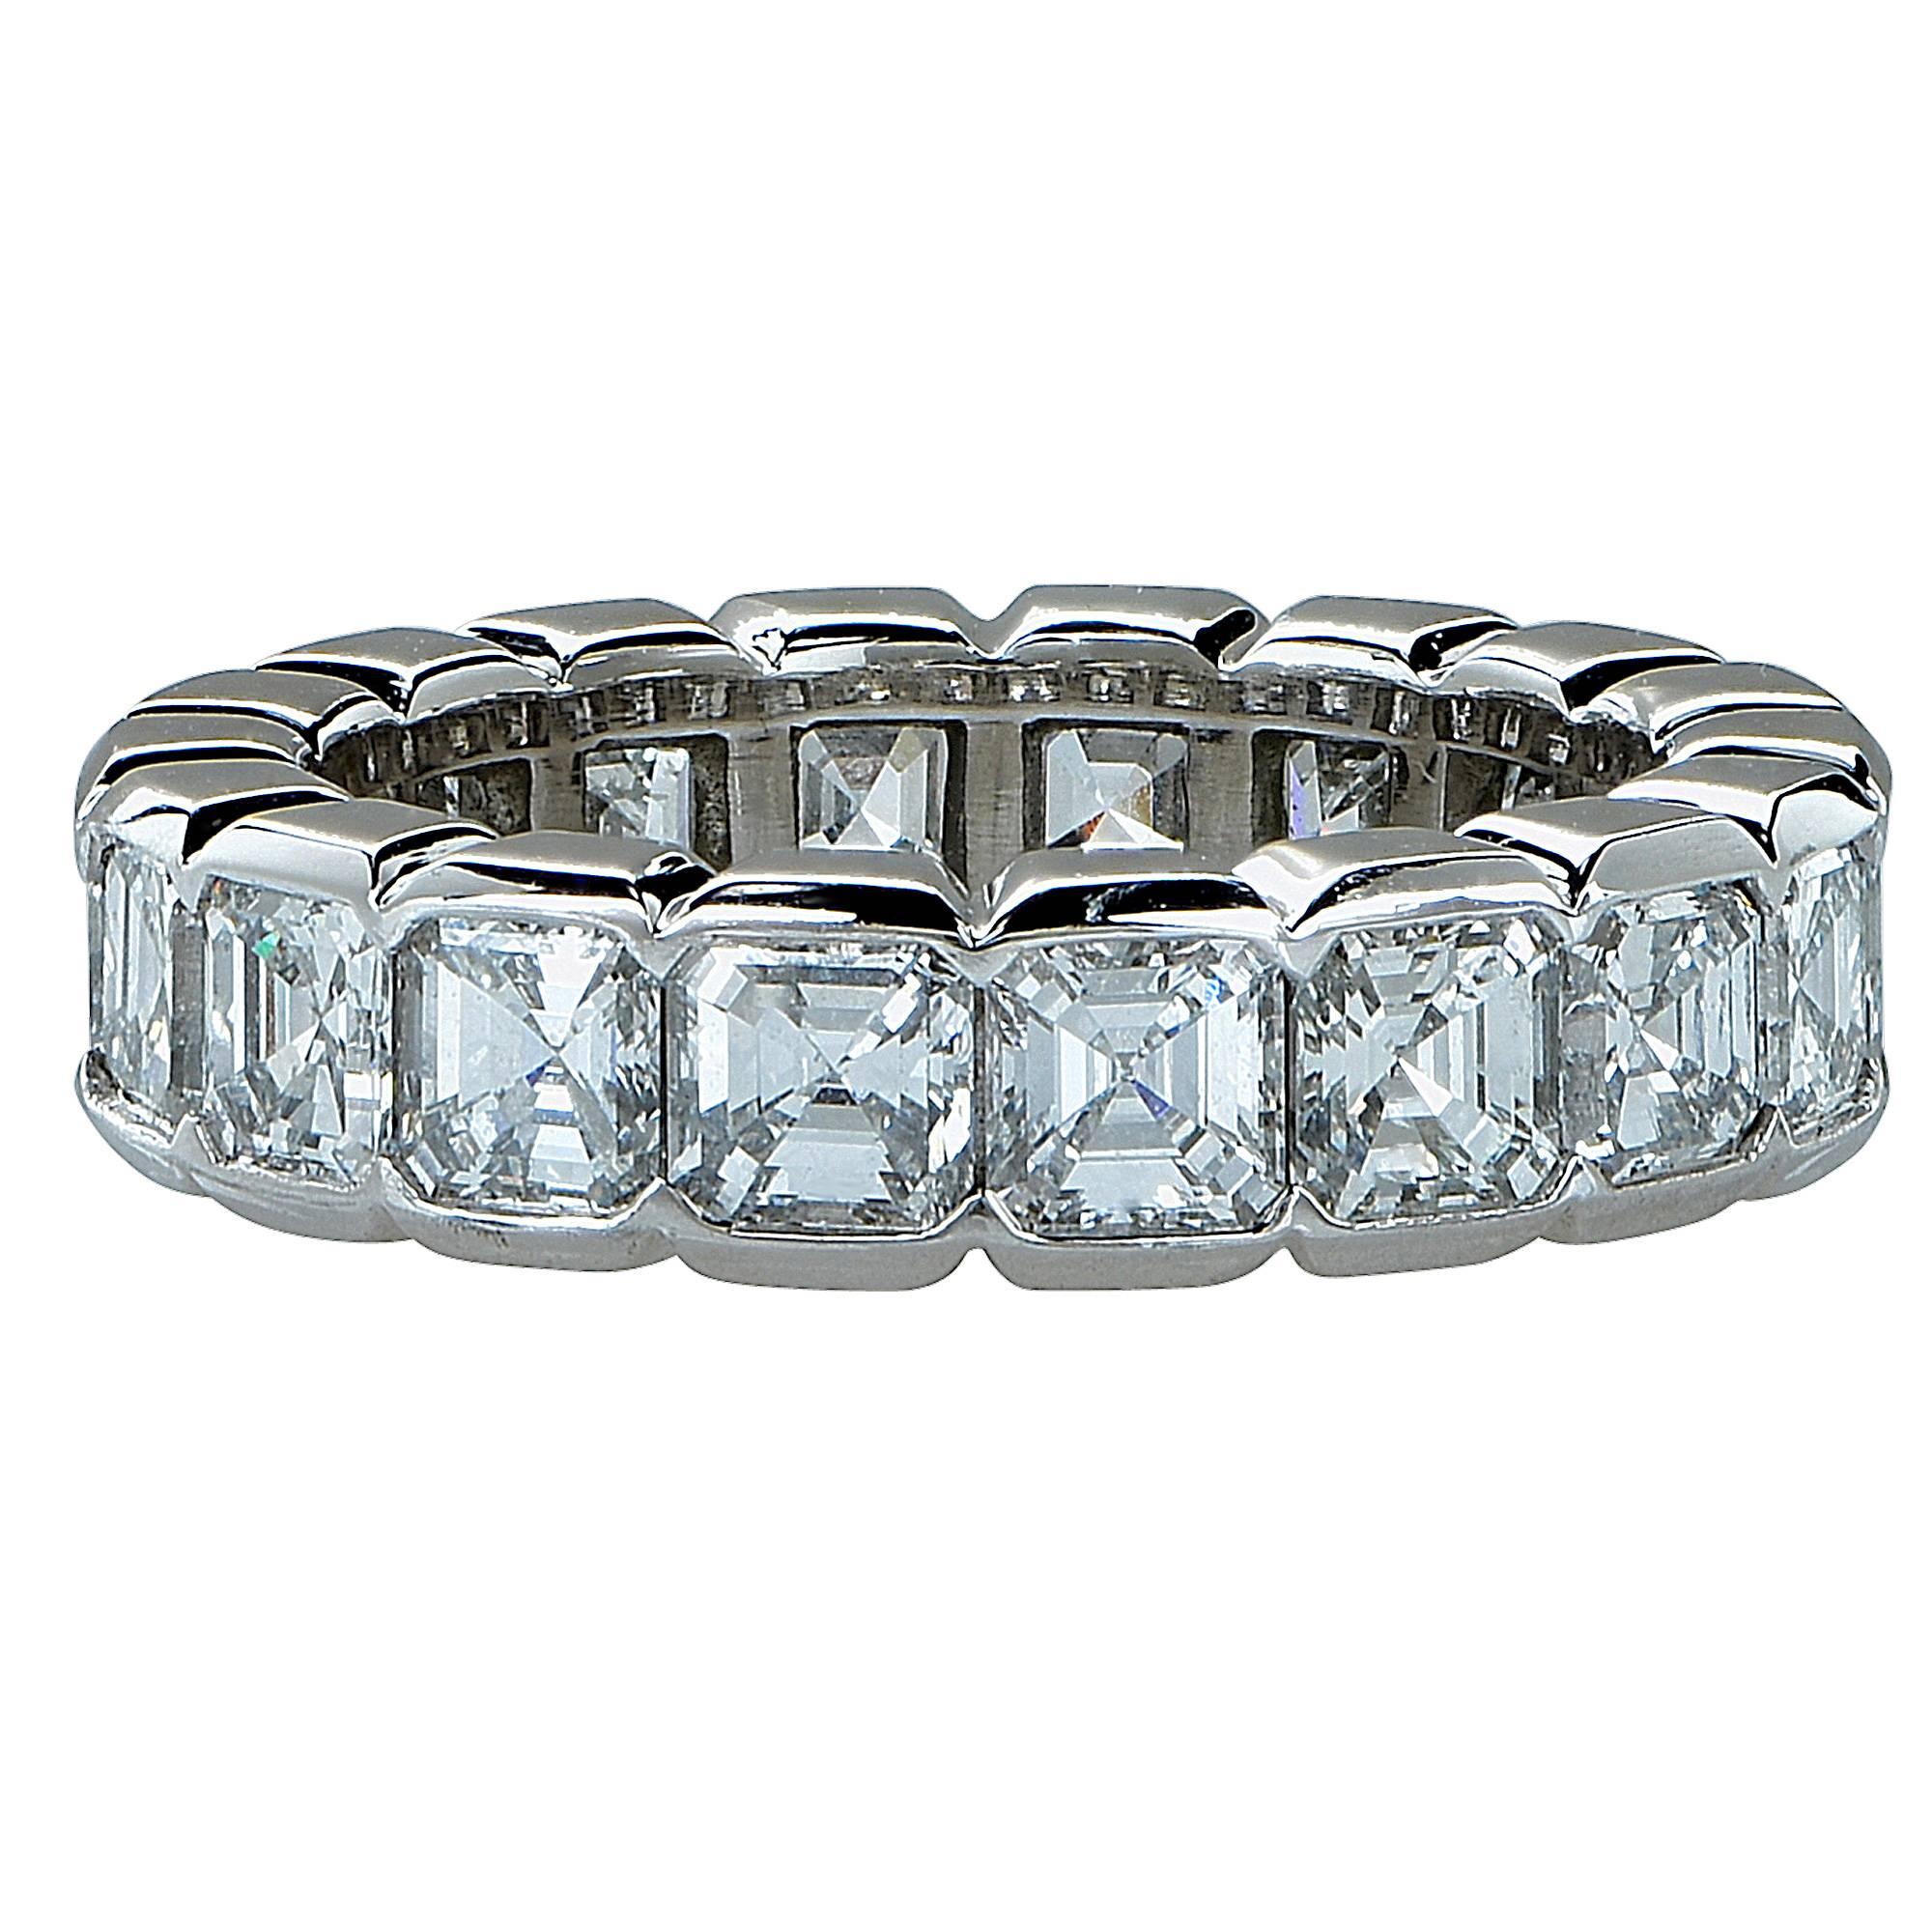 Spectacular Vivid Diamonds eternity band crafted by hand in platinum showcasing 18 perfectly matched hand selected asscher cut diamonds weighing of 3.74 carats total, D-F color, VS clarity. The diamonds are set in a seamless sea of eternity creating